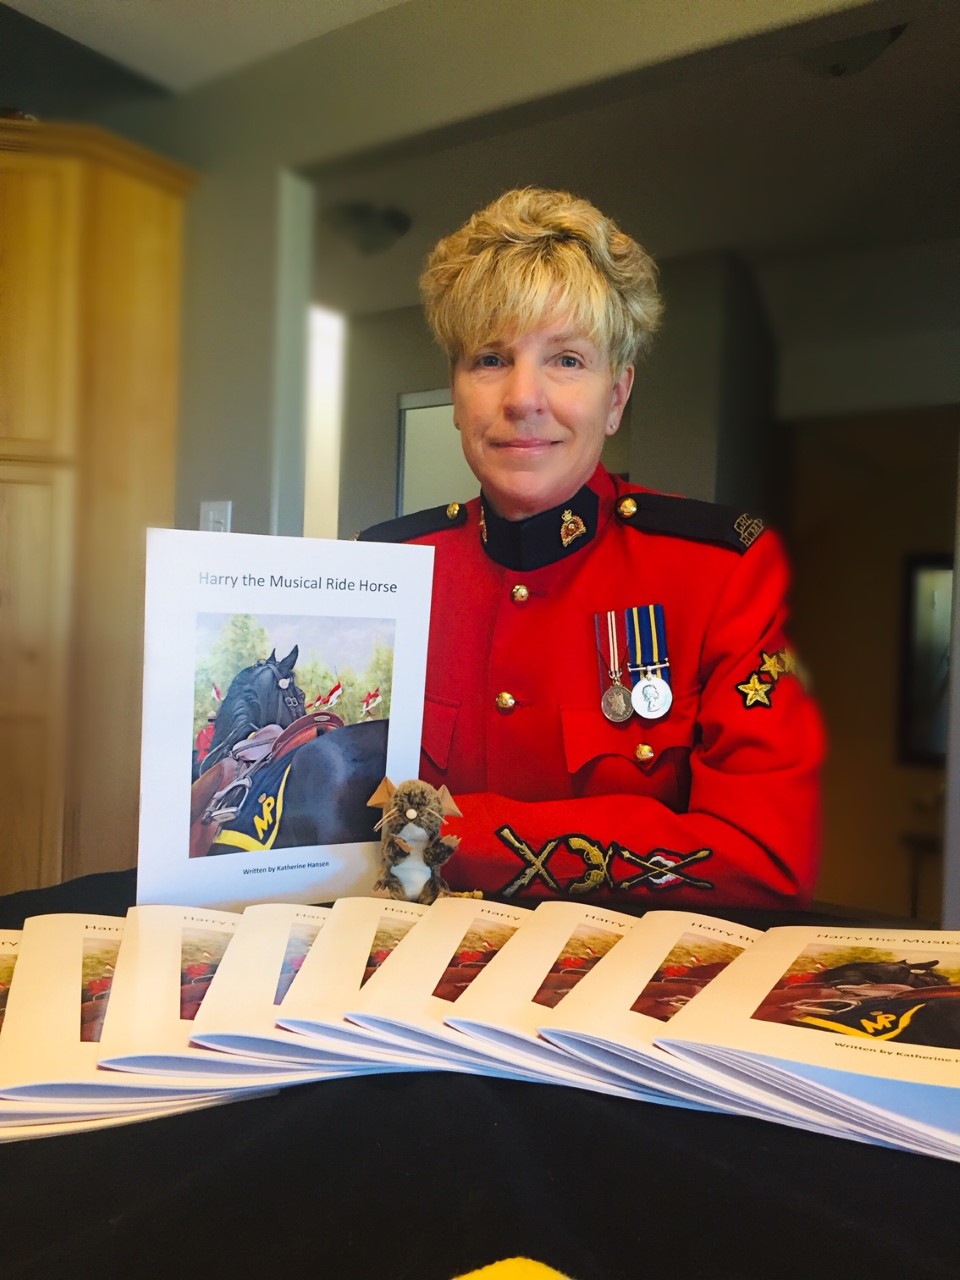 Mountie launches the first children’s book in a series about the Musical Ride: Harry the Musical Ride Horse